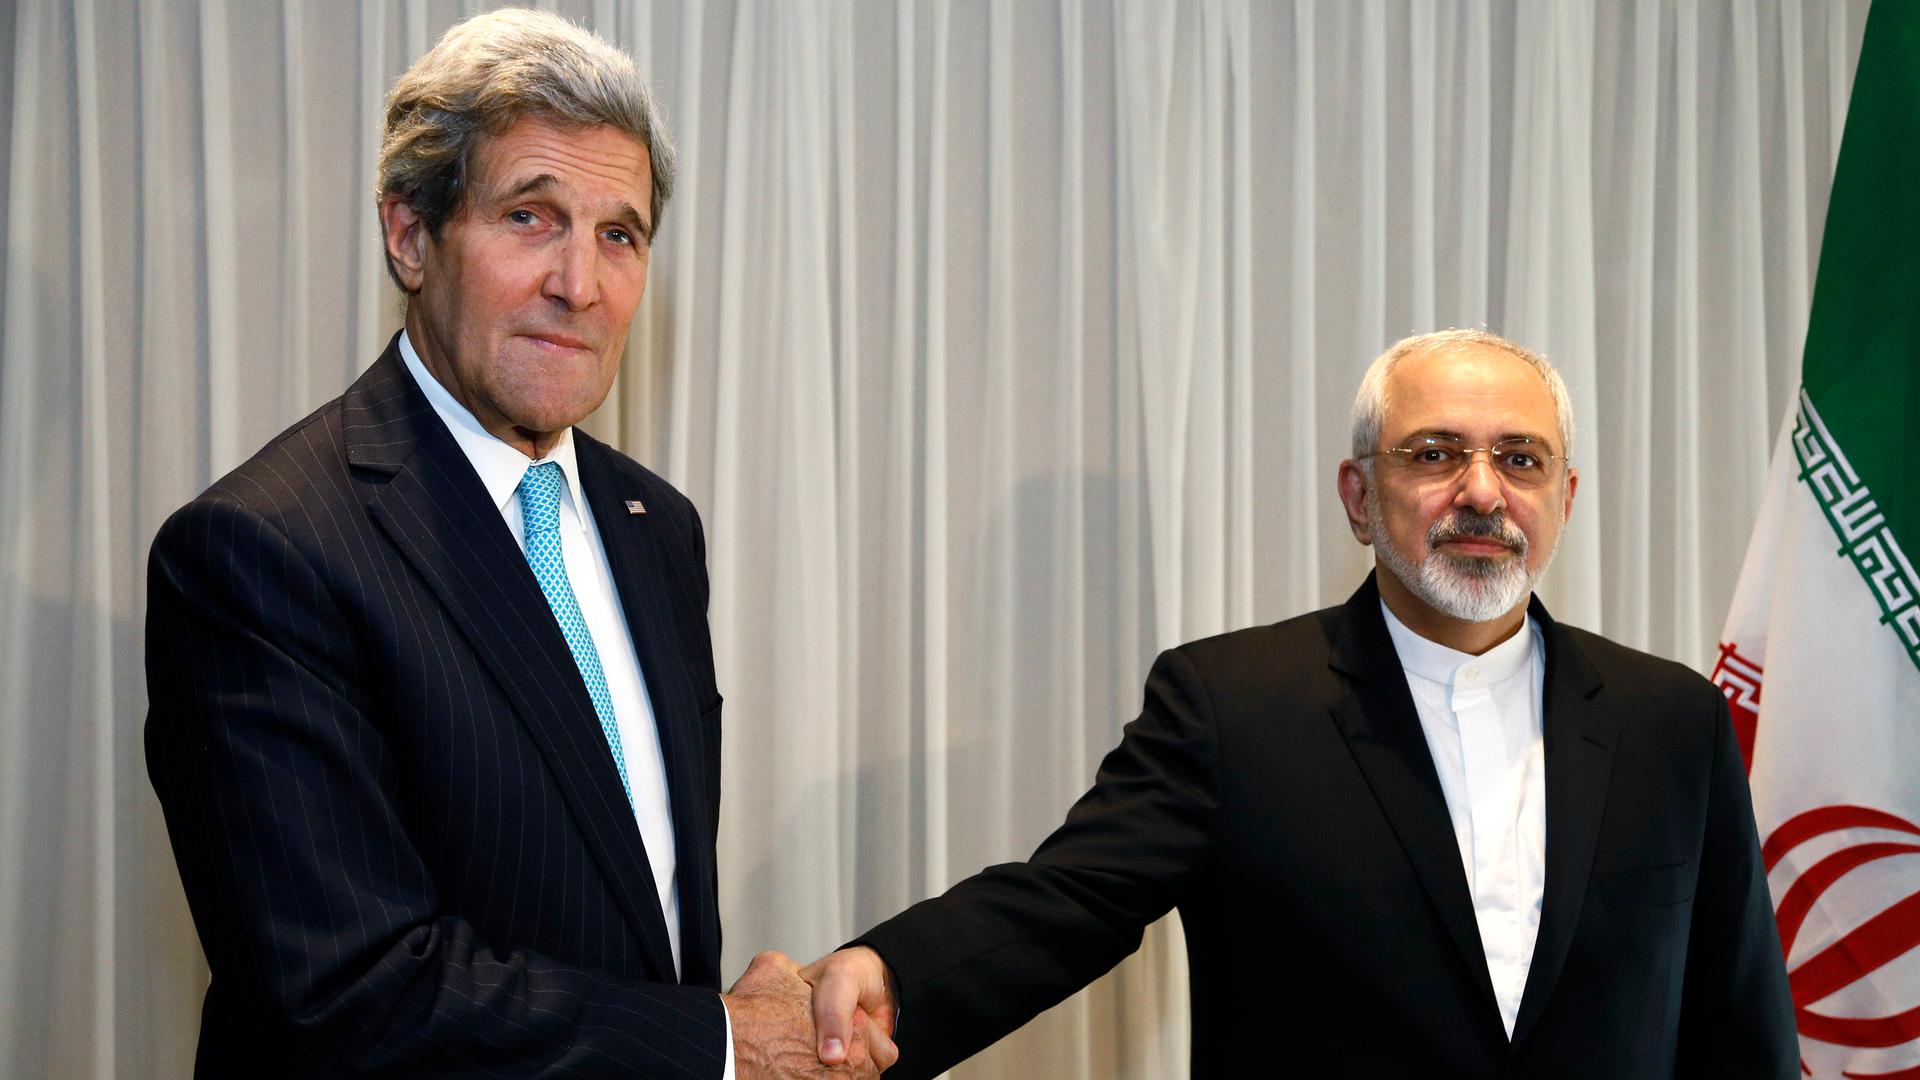 US Secretary of State John Kerry shakes hands with Iranian Foreign Minister Mohammad Javad Zarif before a meeting in Geneva on January 14, 2015.